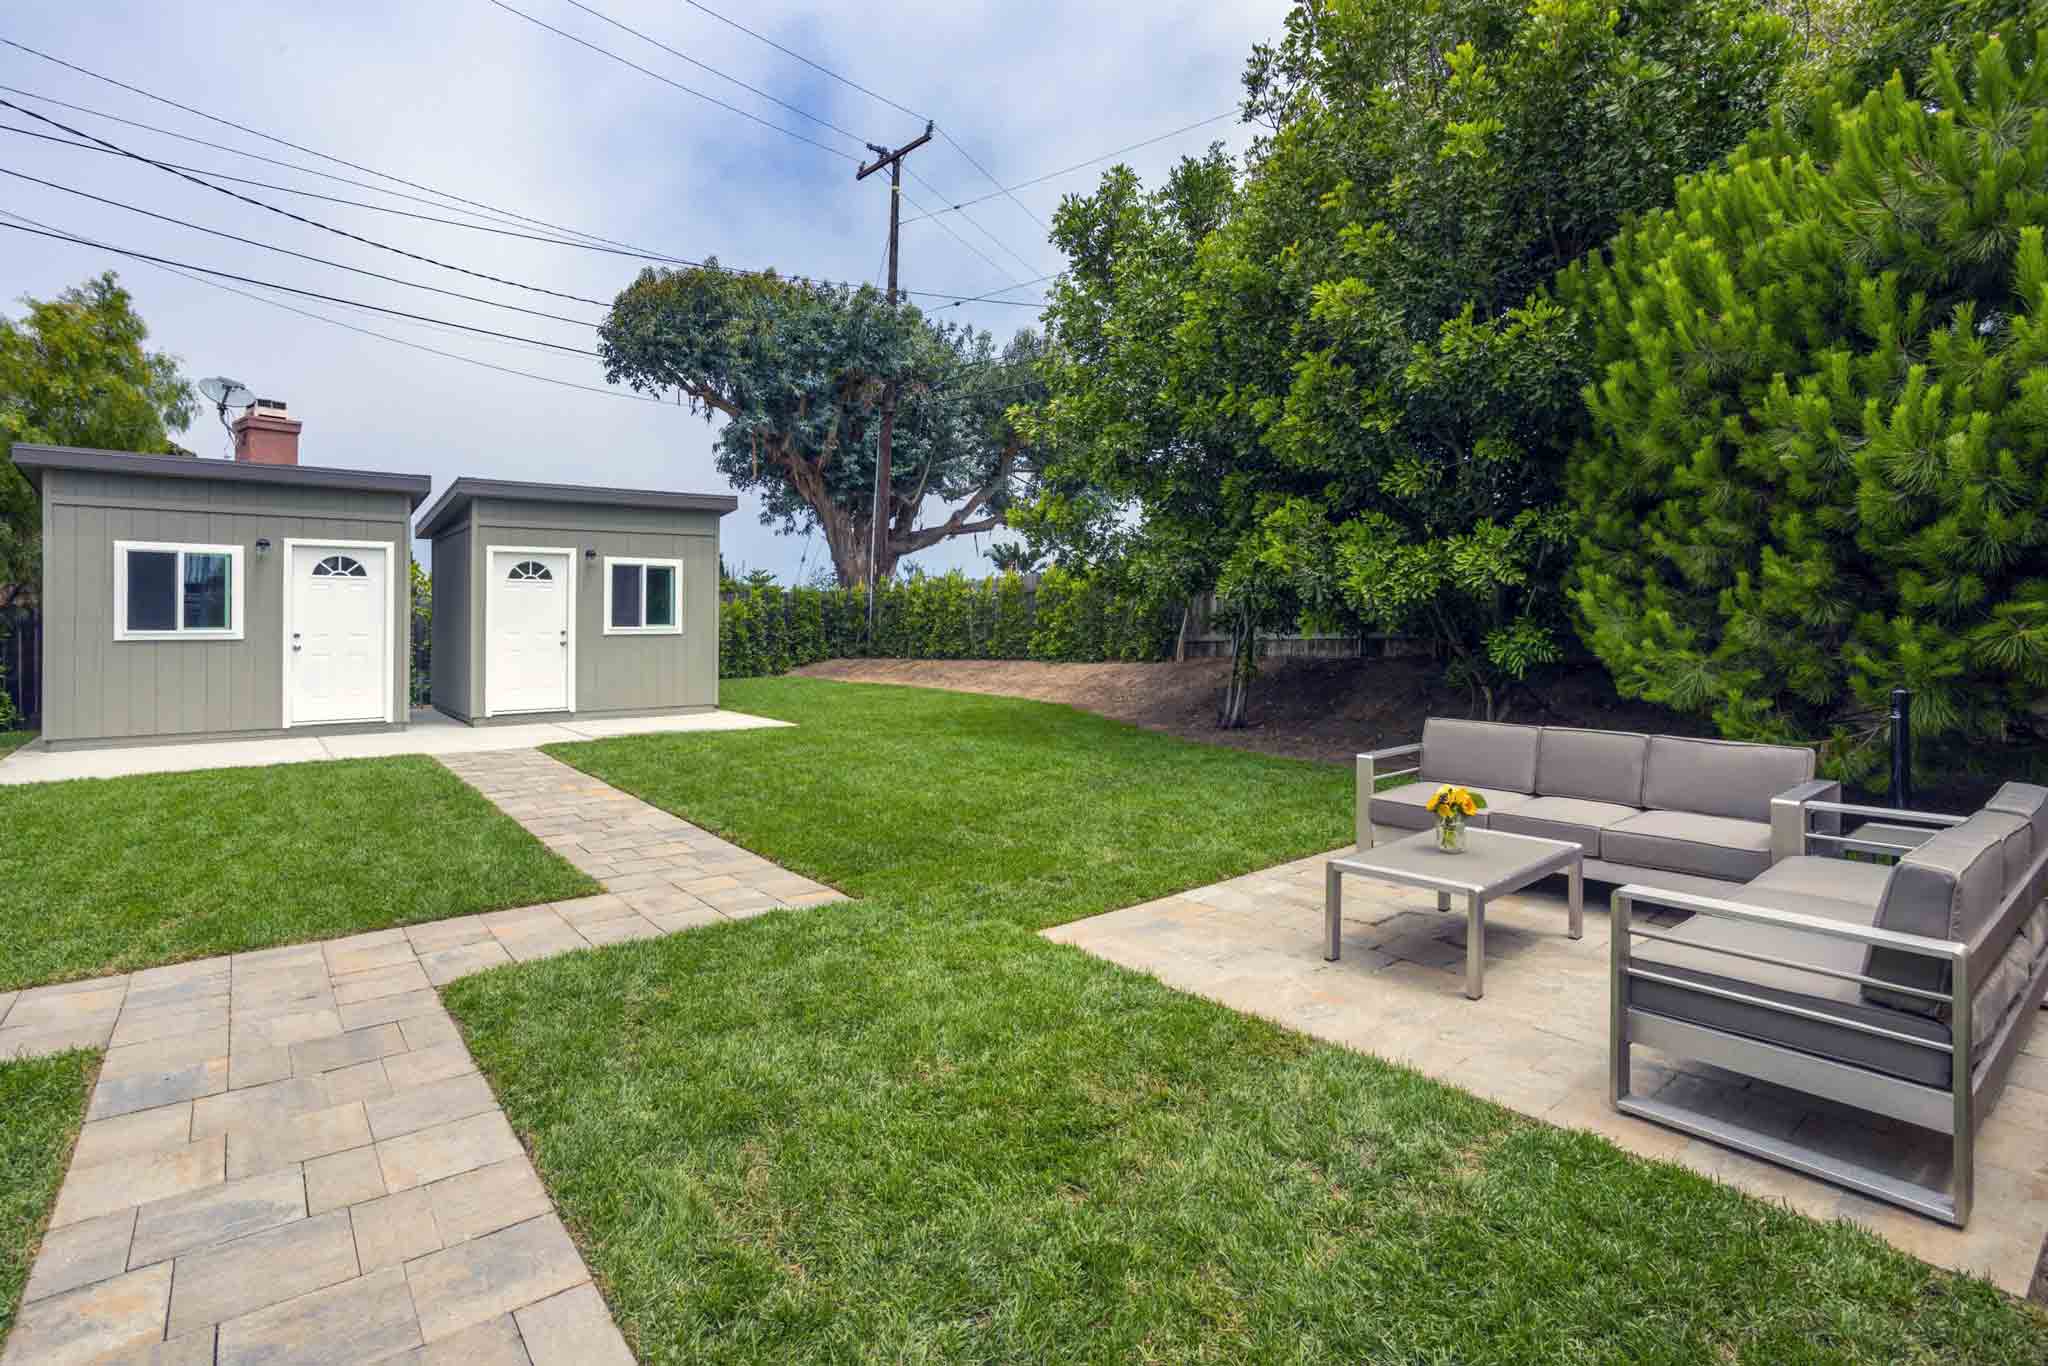 Photo of a backyard with couches at a residential treatment center in Los Angeles